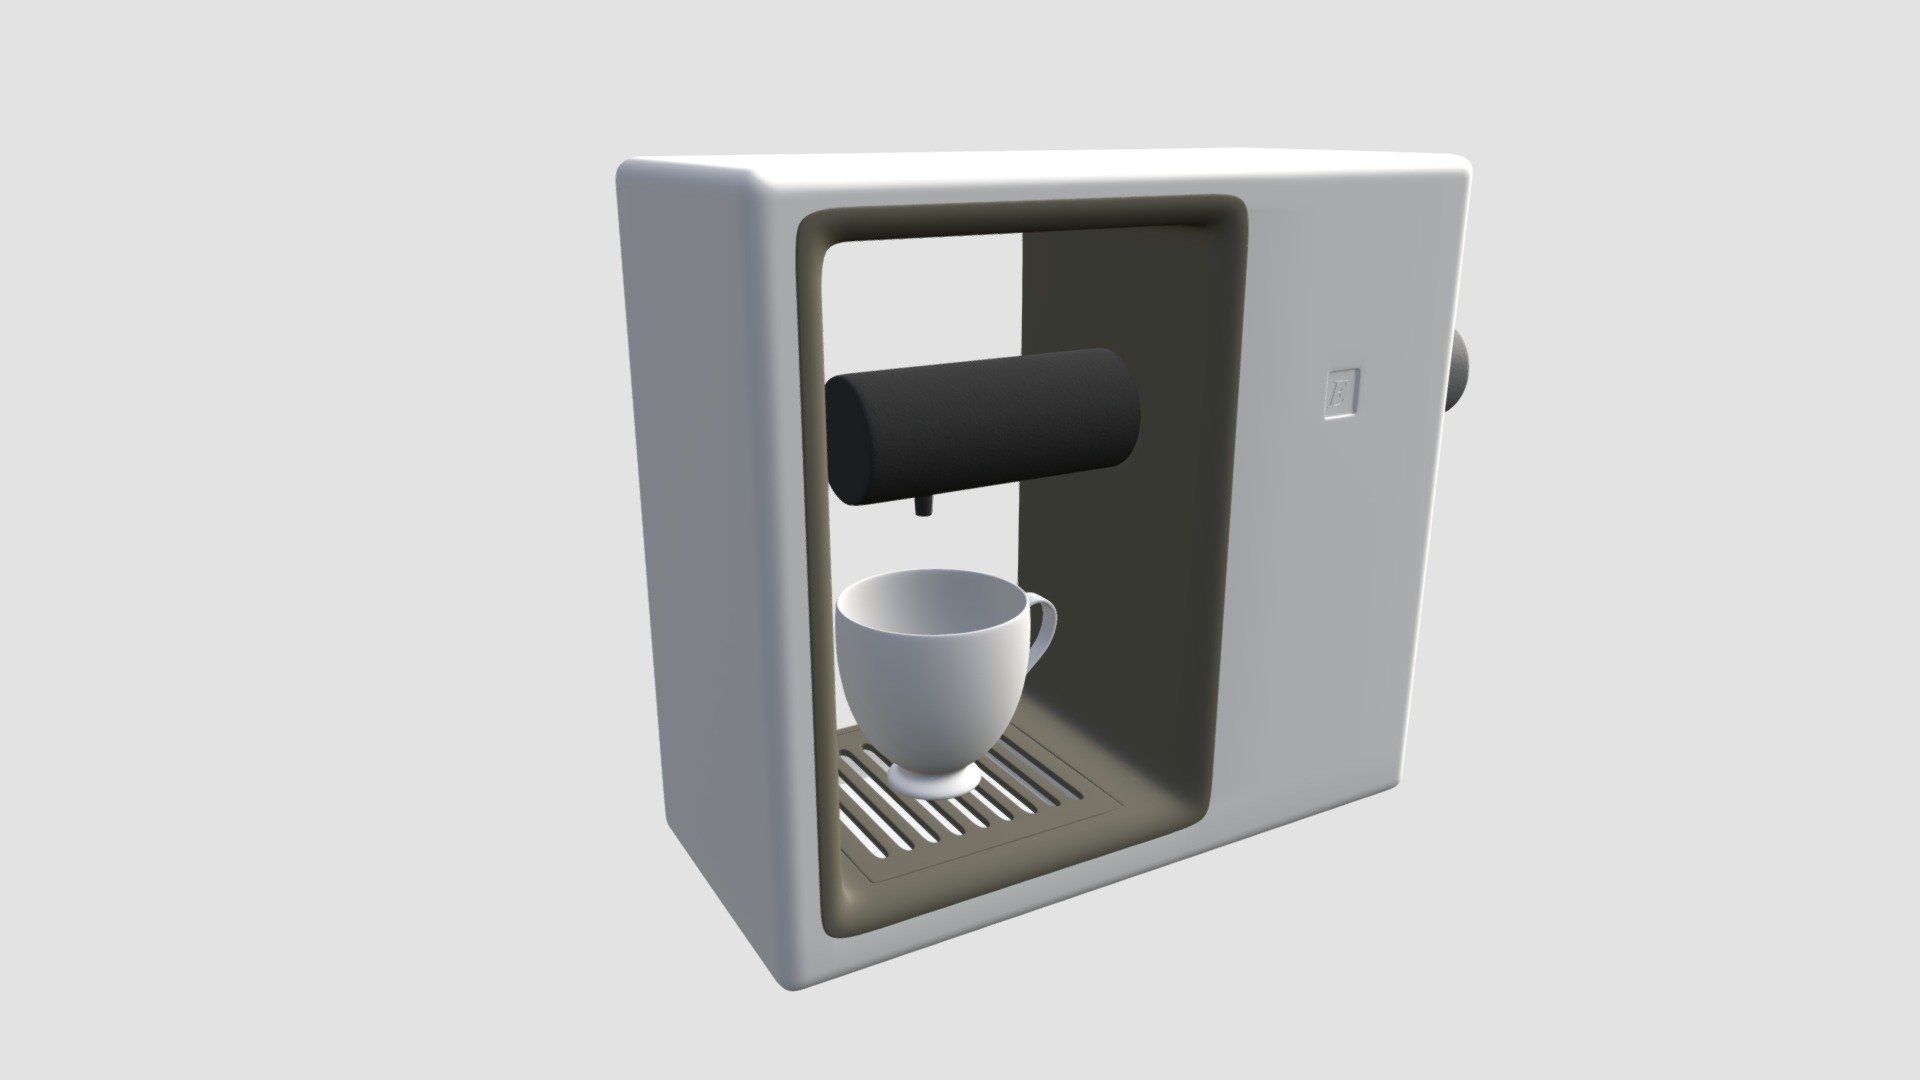 Highly detailed 3d model of coffee maker with all textures, shaders and materials. It is ready to use, just put it into your scene 3d model